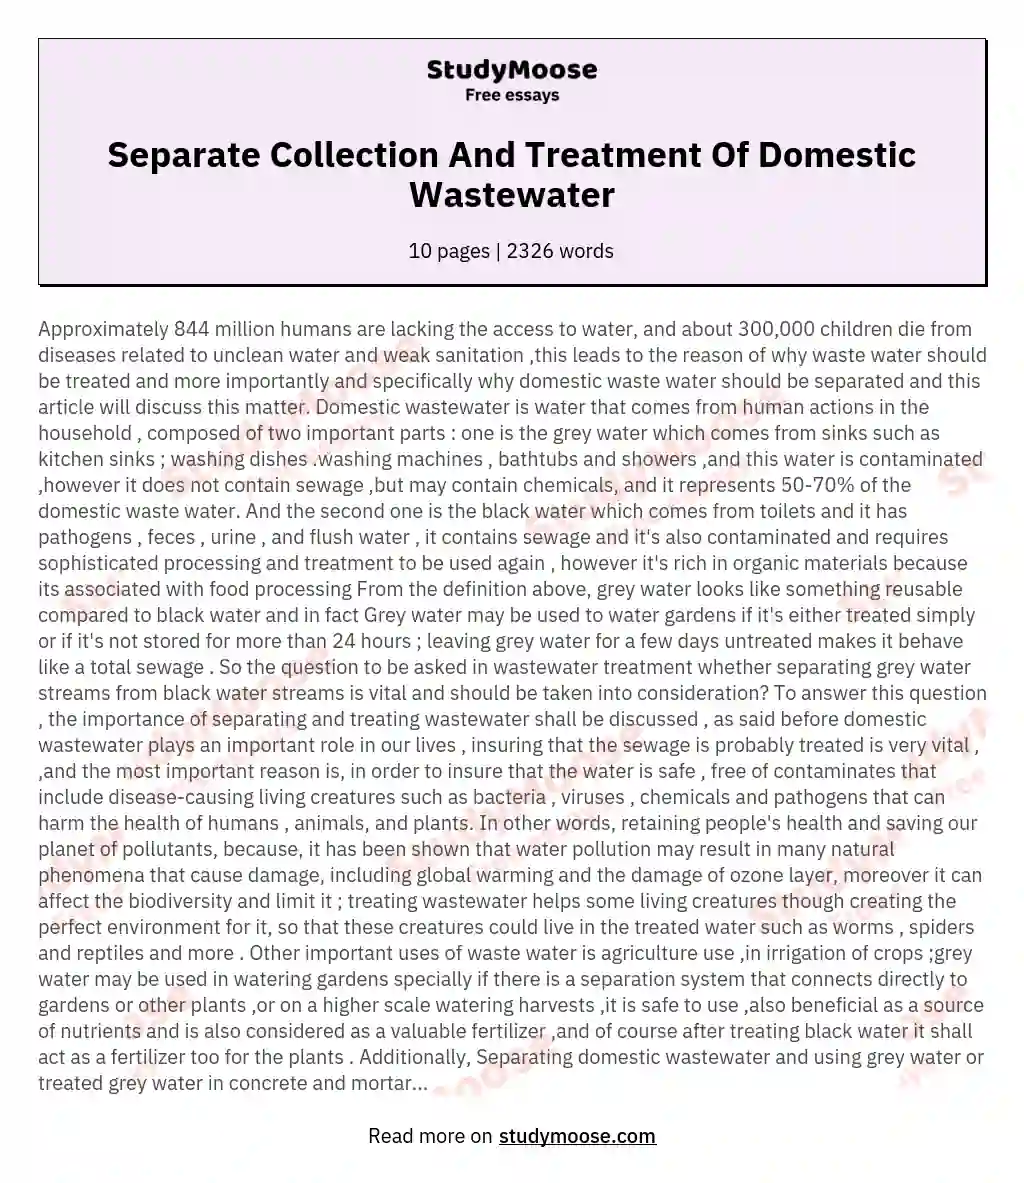 Separate Collection And Treatment Of Domestic Wastewater essay